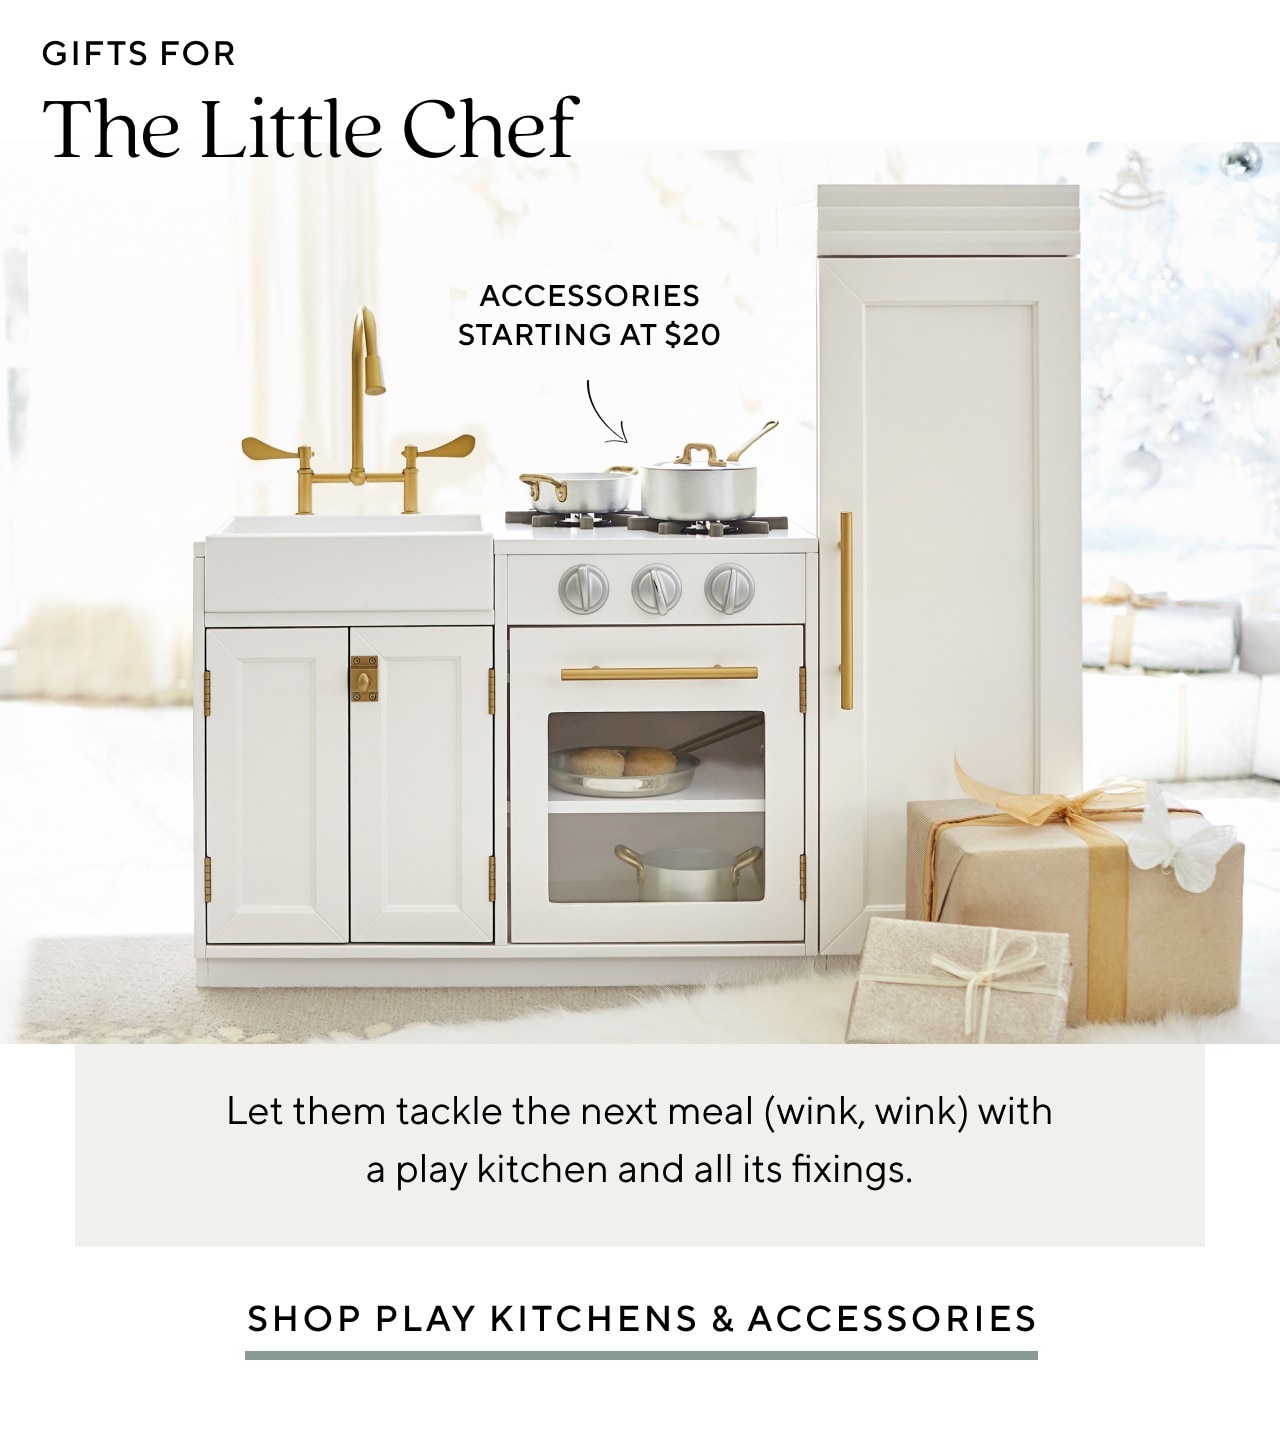 GIFTS FOR THE LITTLE CHEF